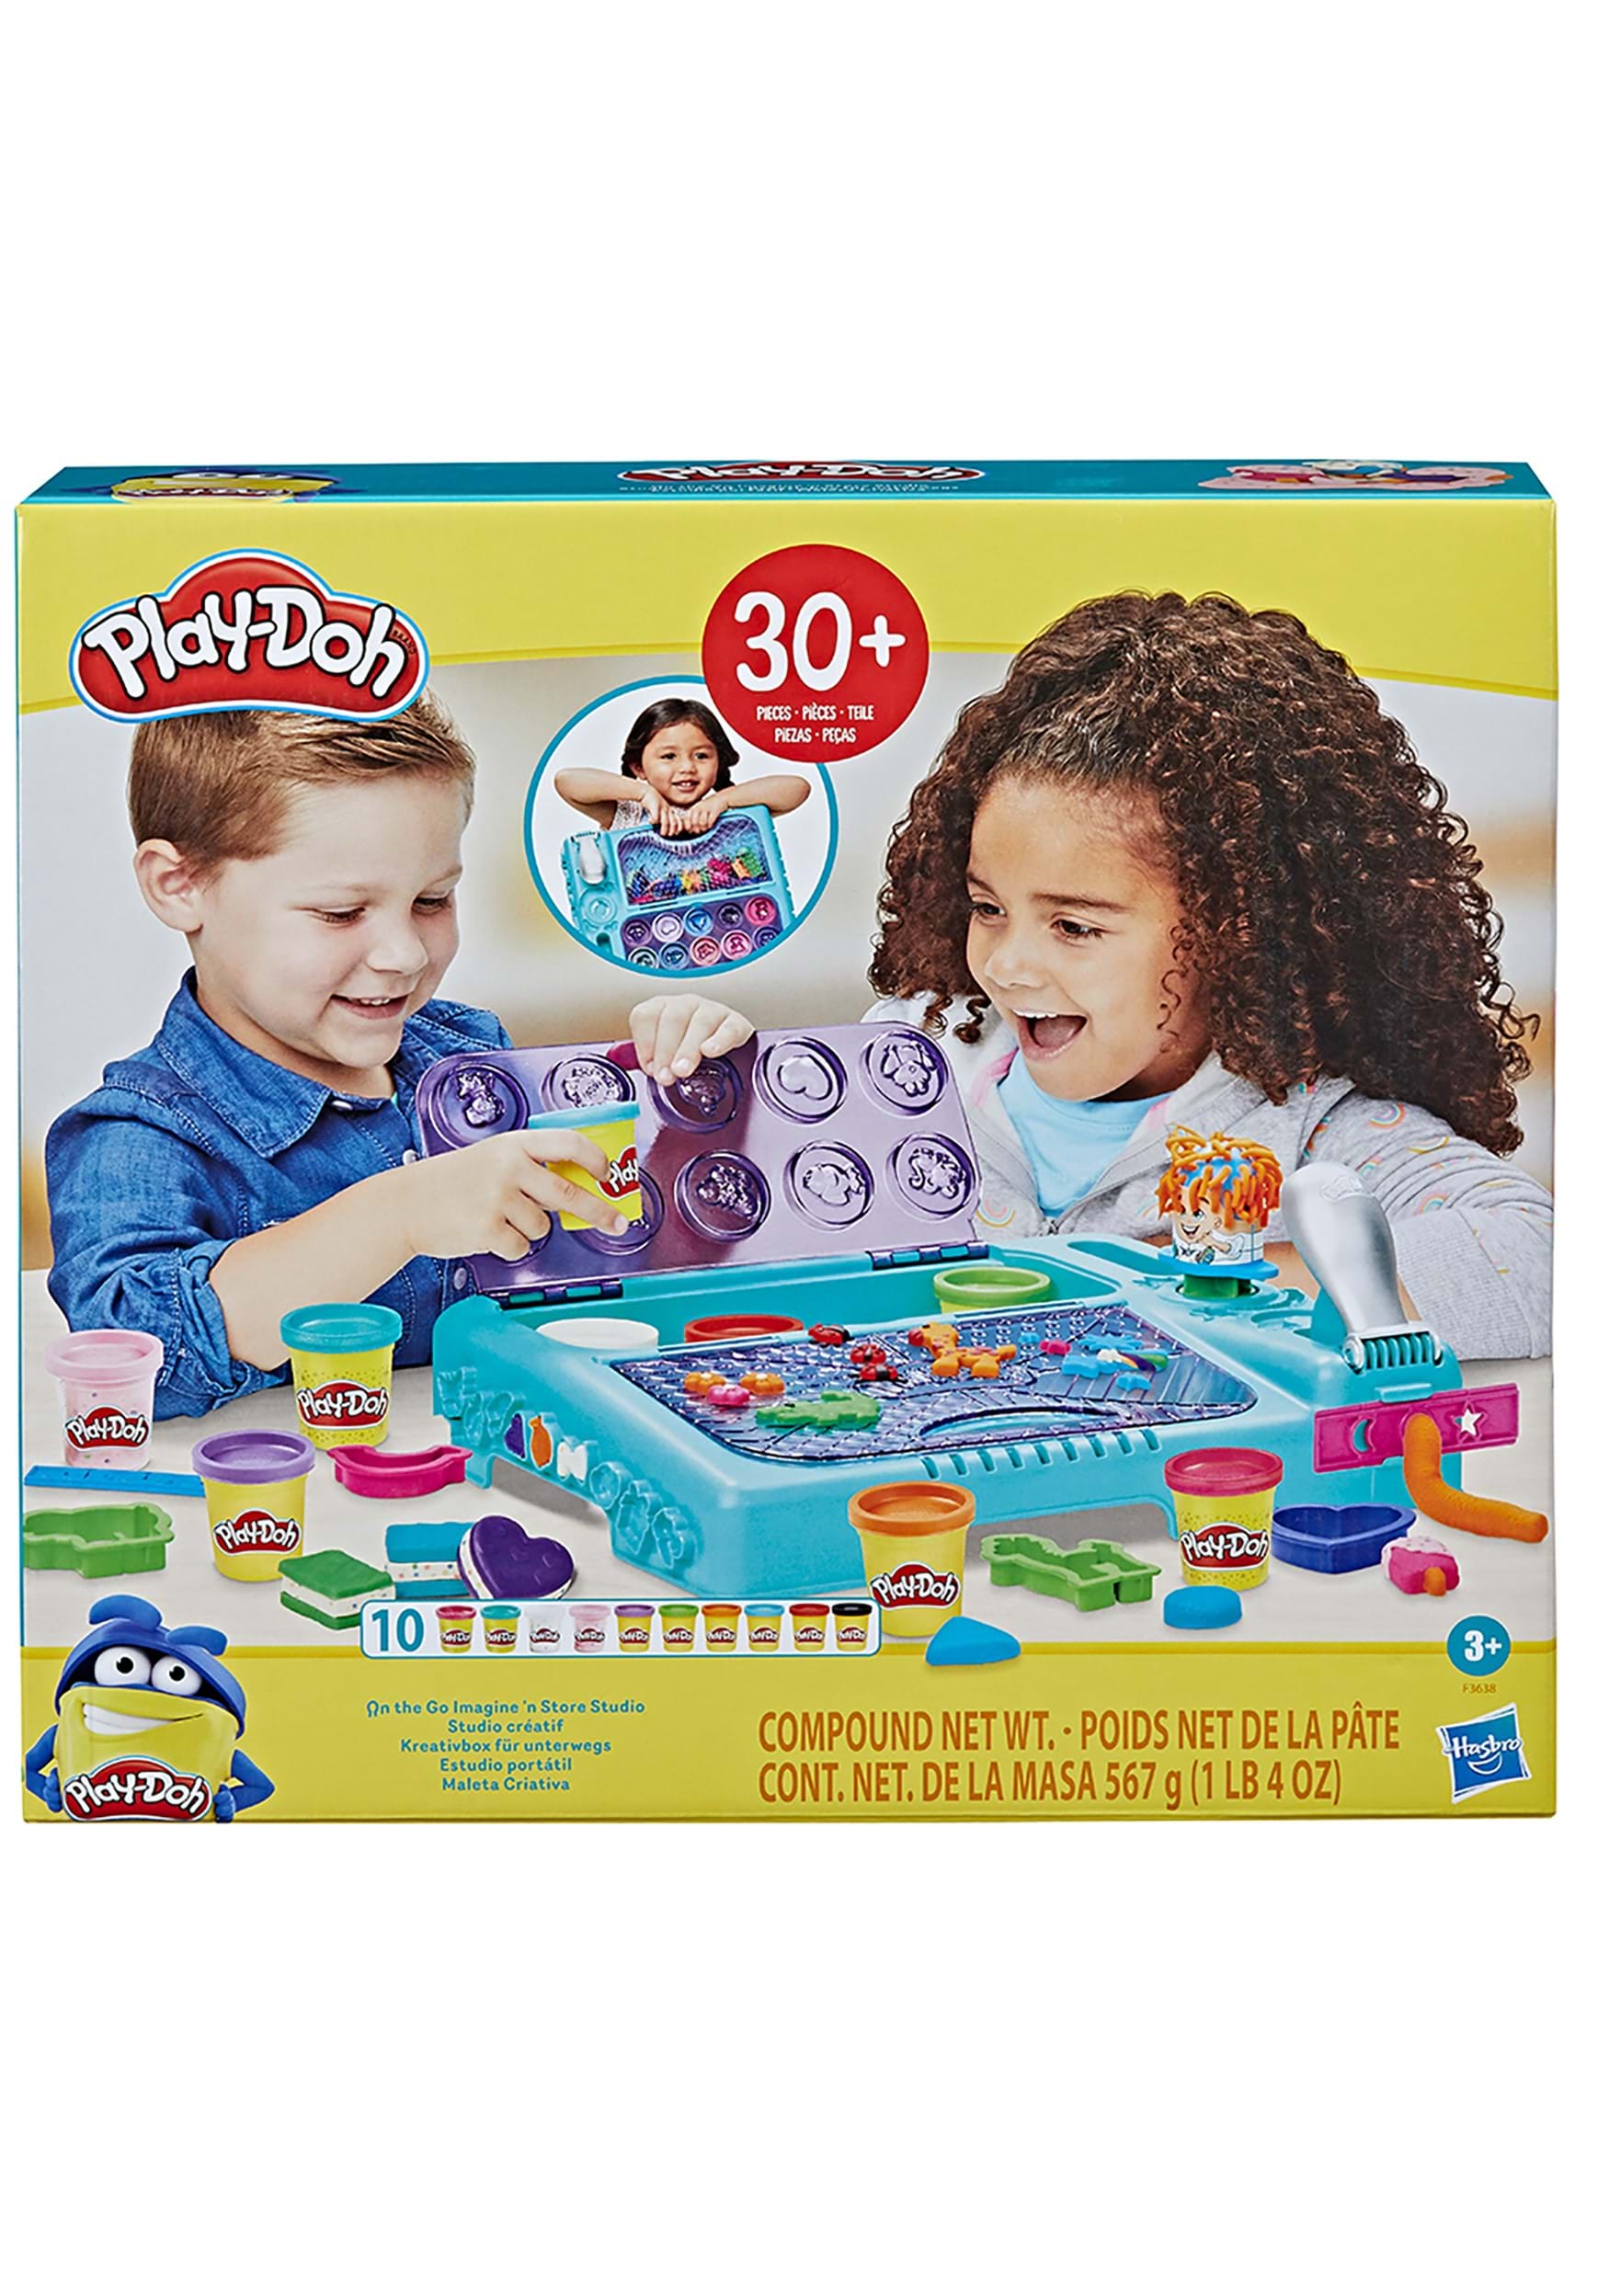 On the Go Imagine and Store Studio Play-Doh Playset